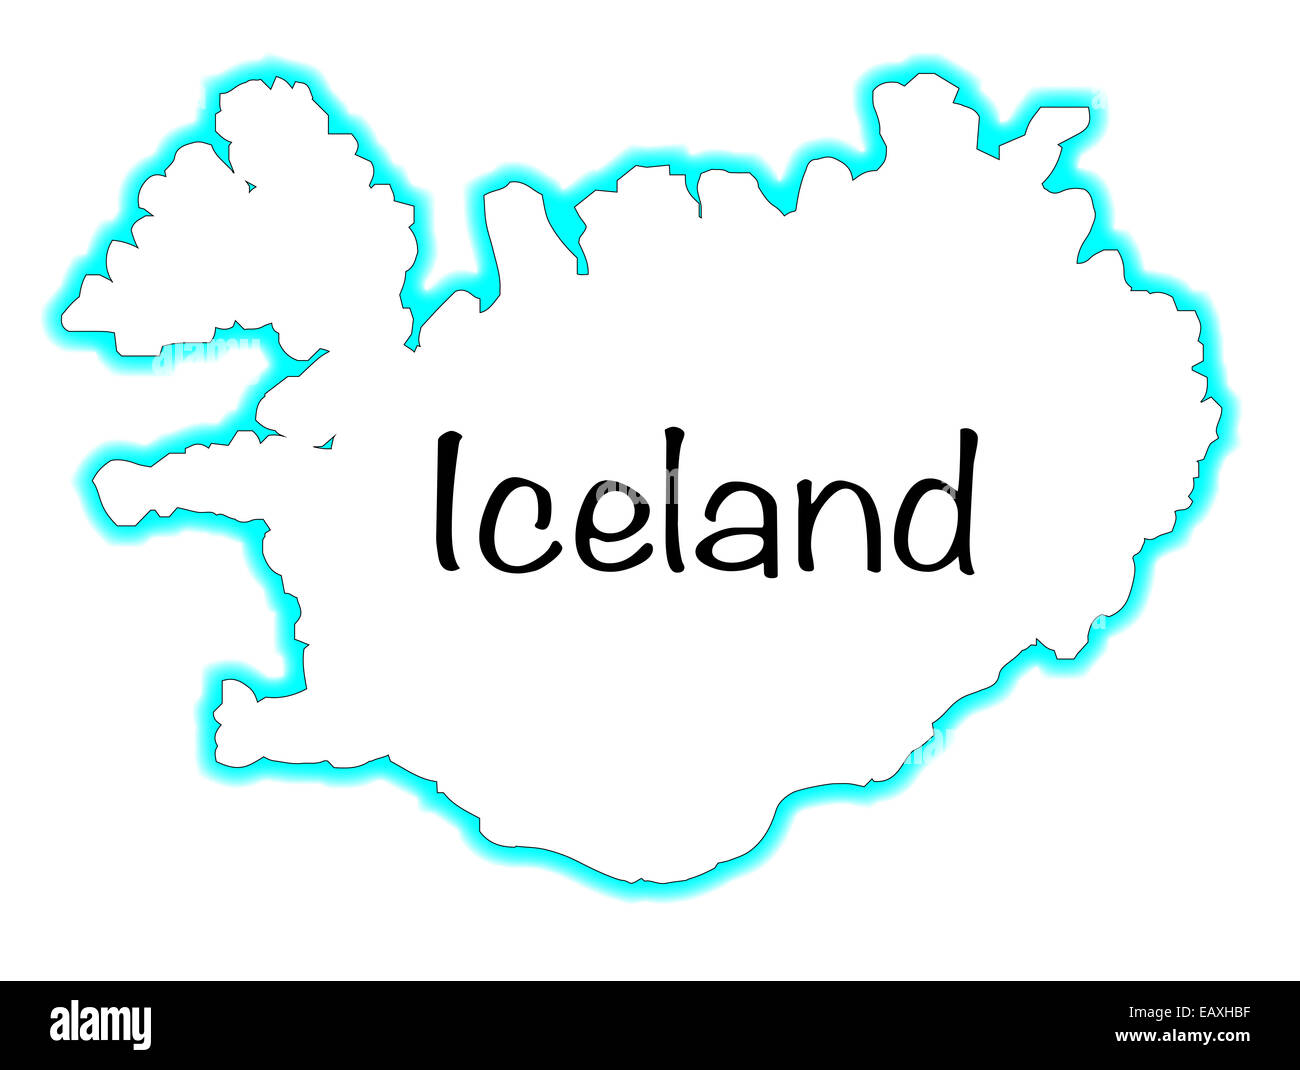 Outline map of Iceland over a white background Stock Photo